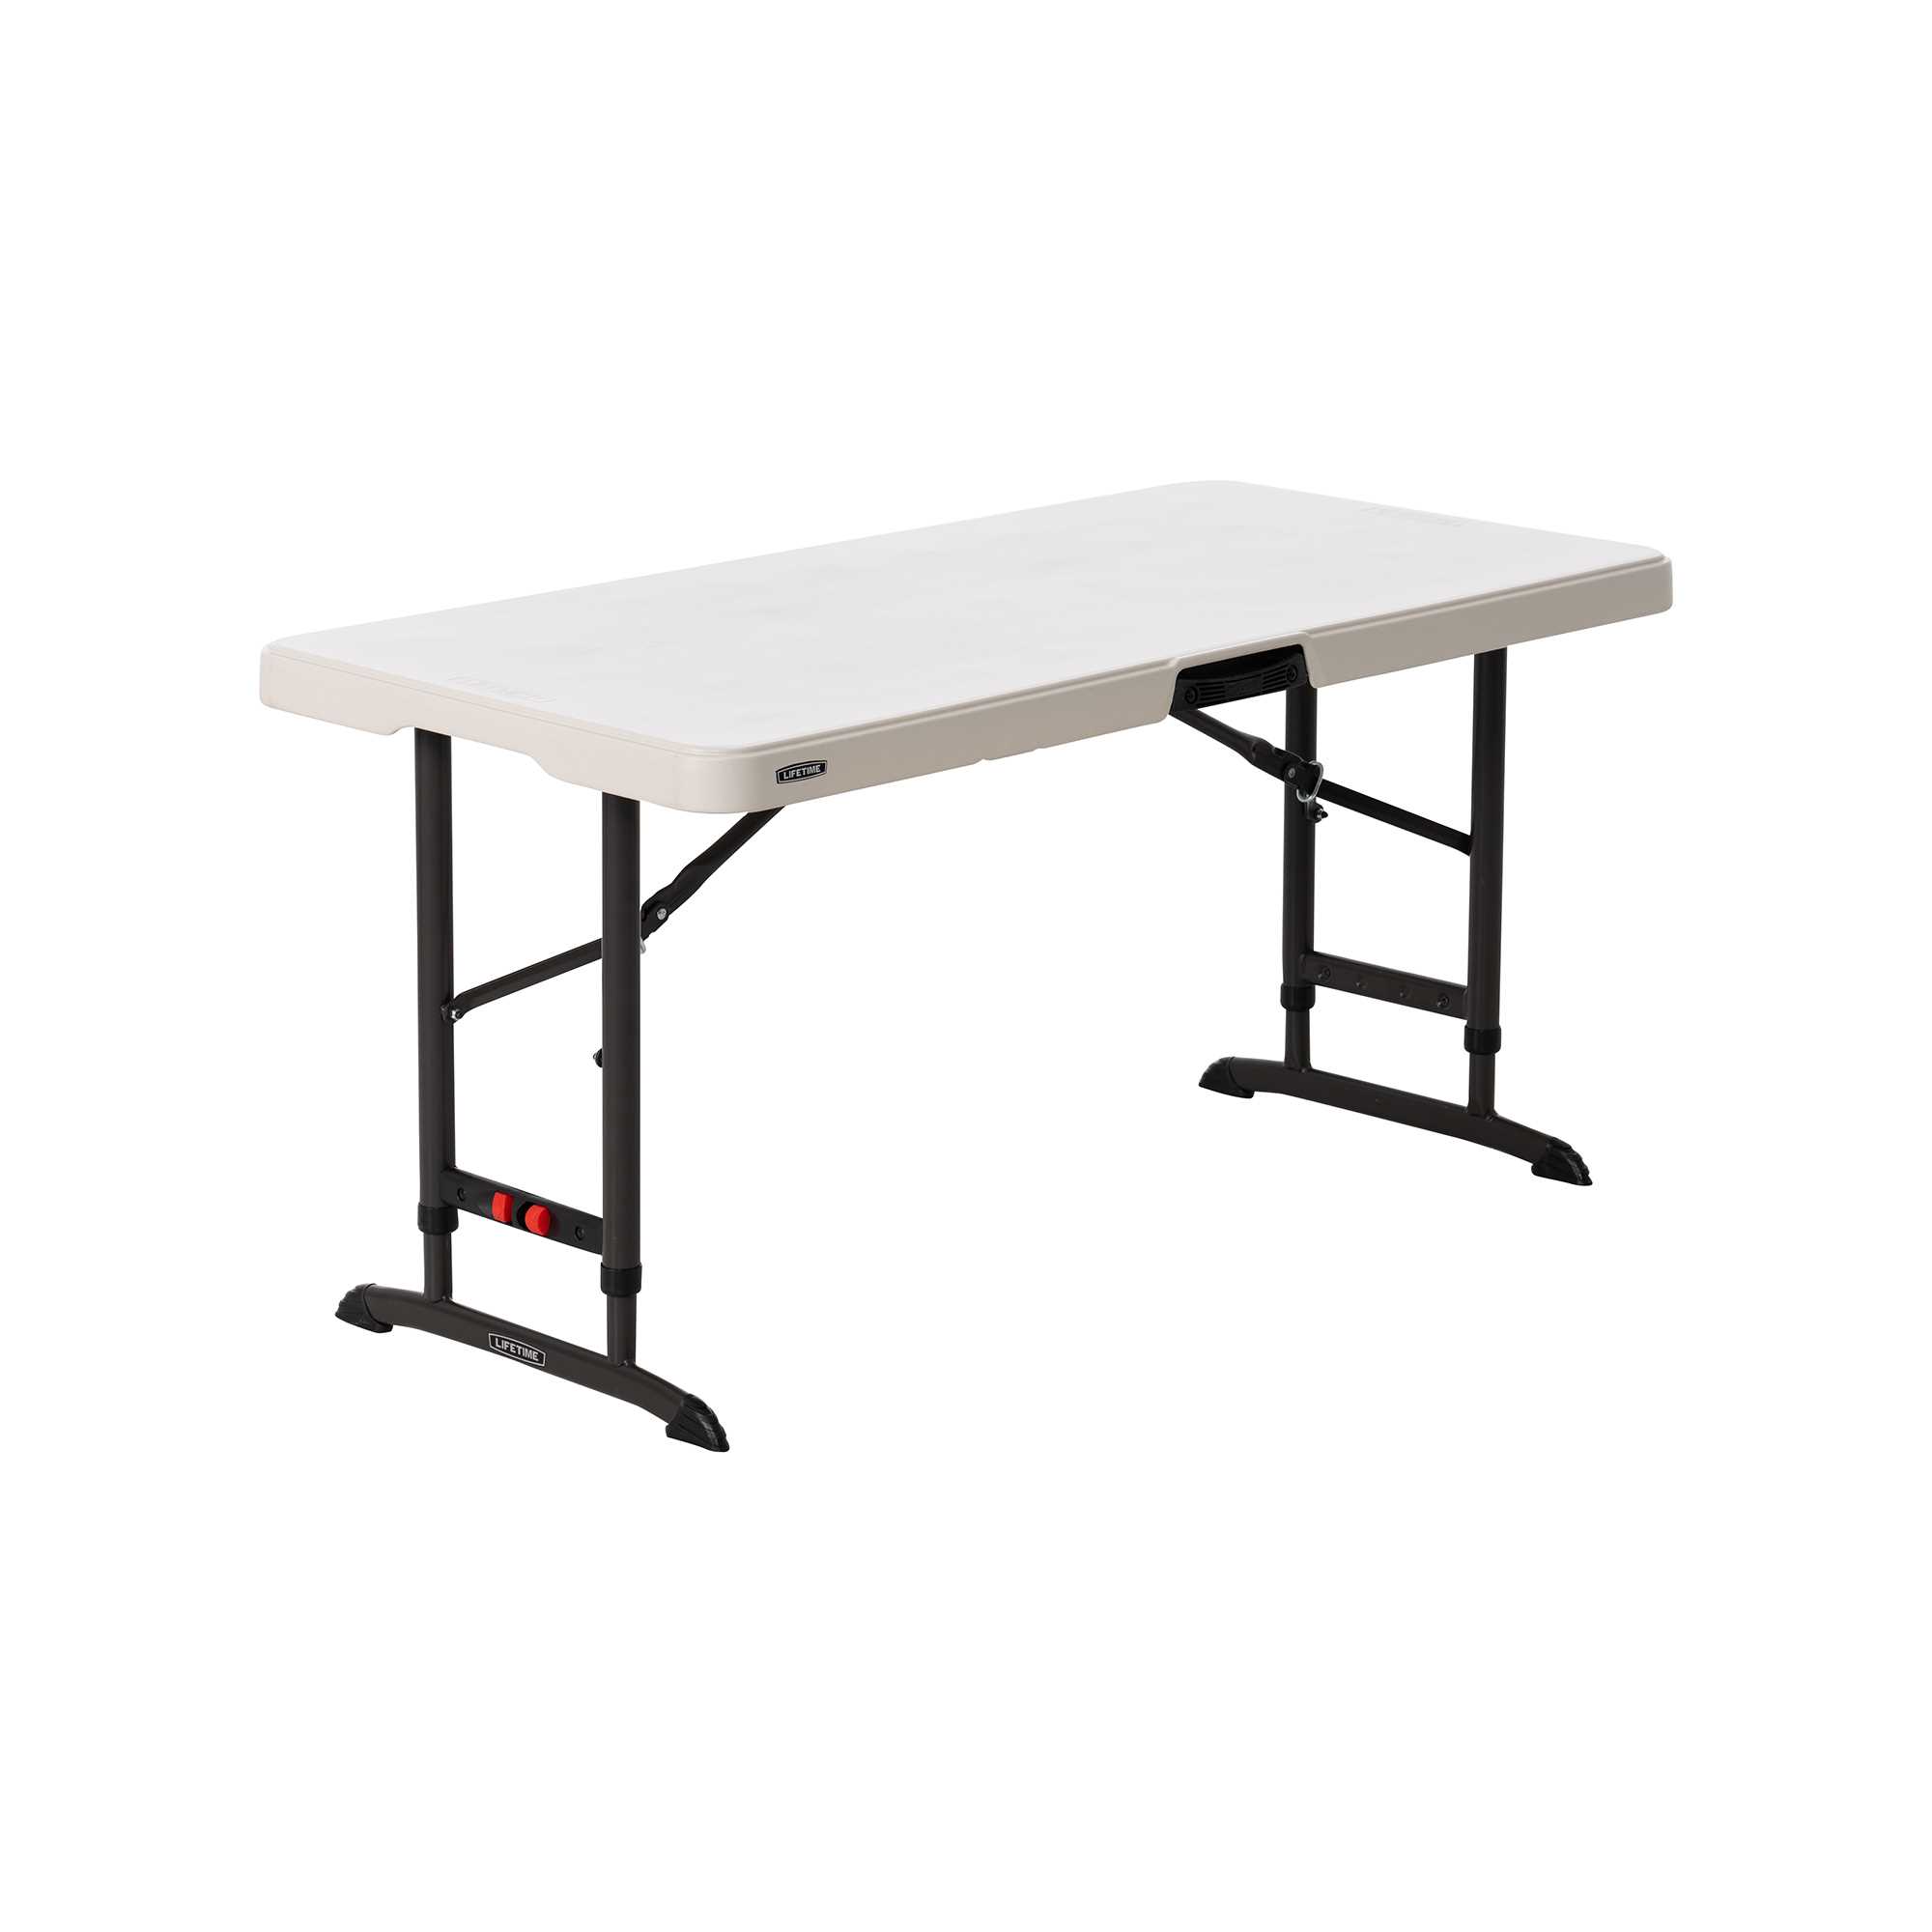 4ft Rectangular folding table 122cm / Adjustable height / 4 people / NESTING heavy commercial